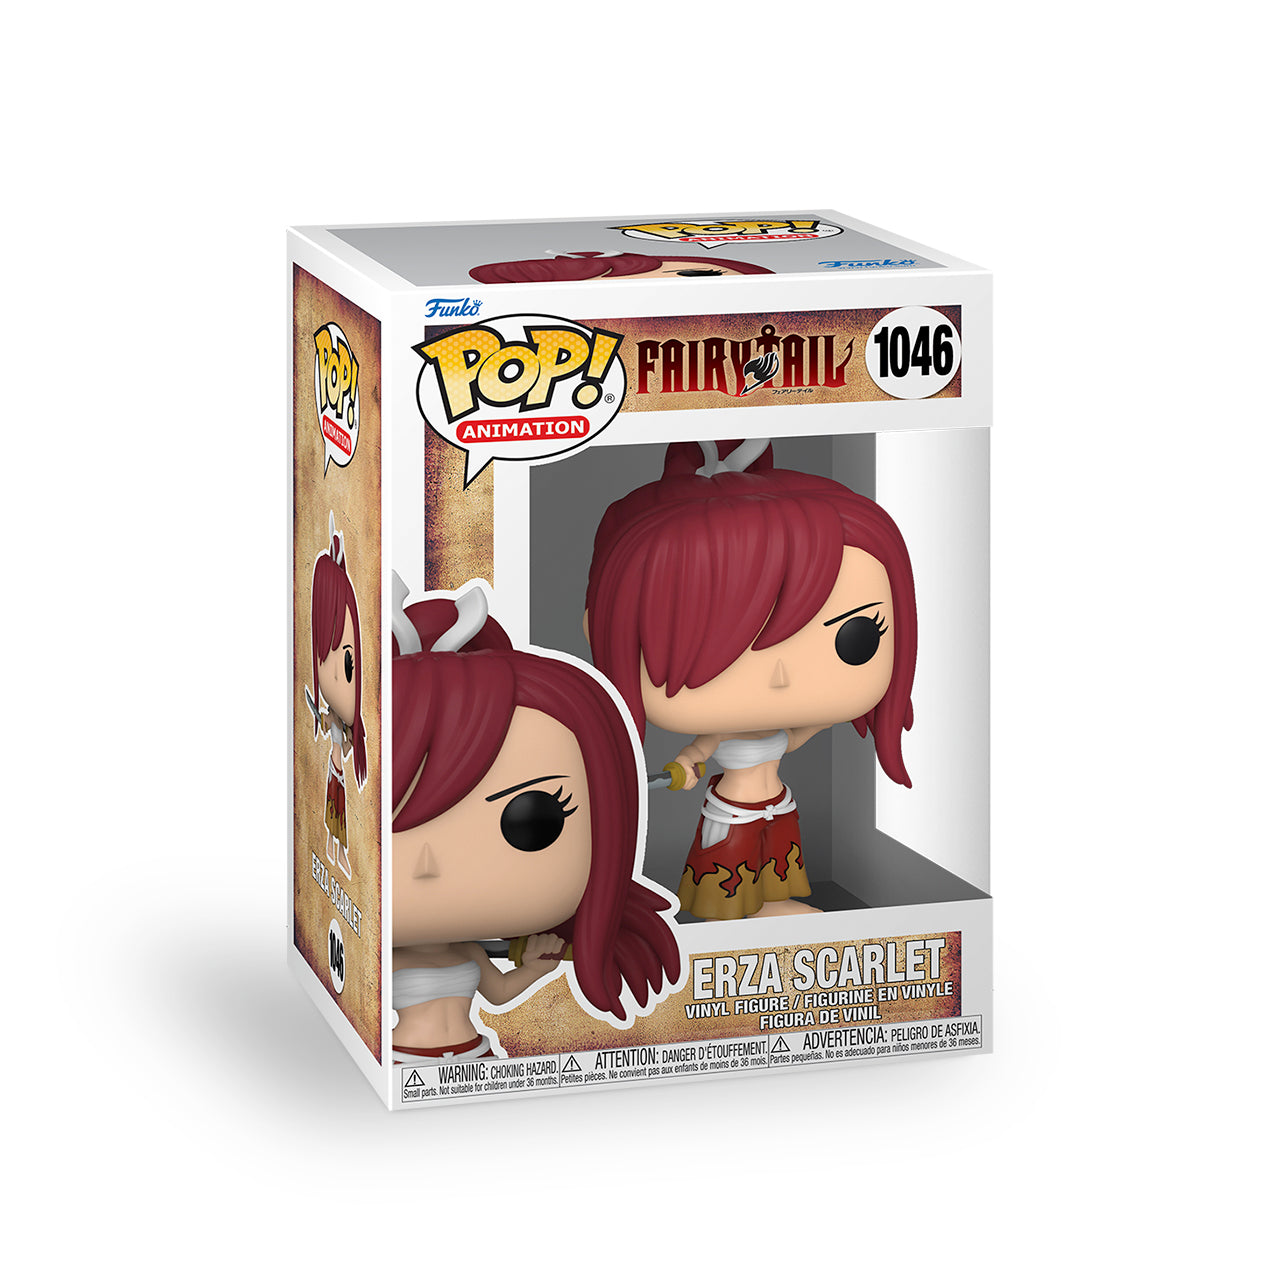 Fairy Tail - Erza Scarlet Funko Pop! image count 1